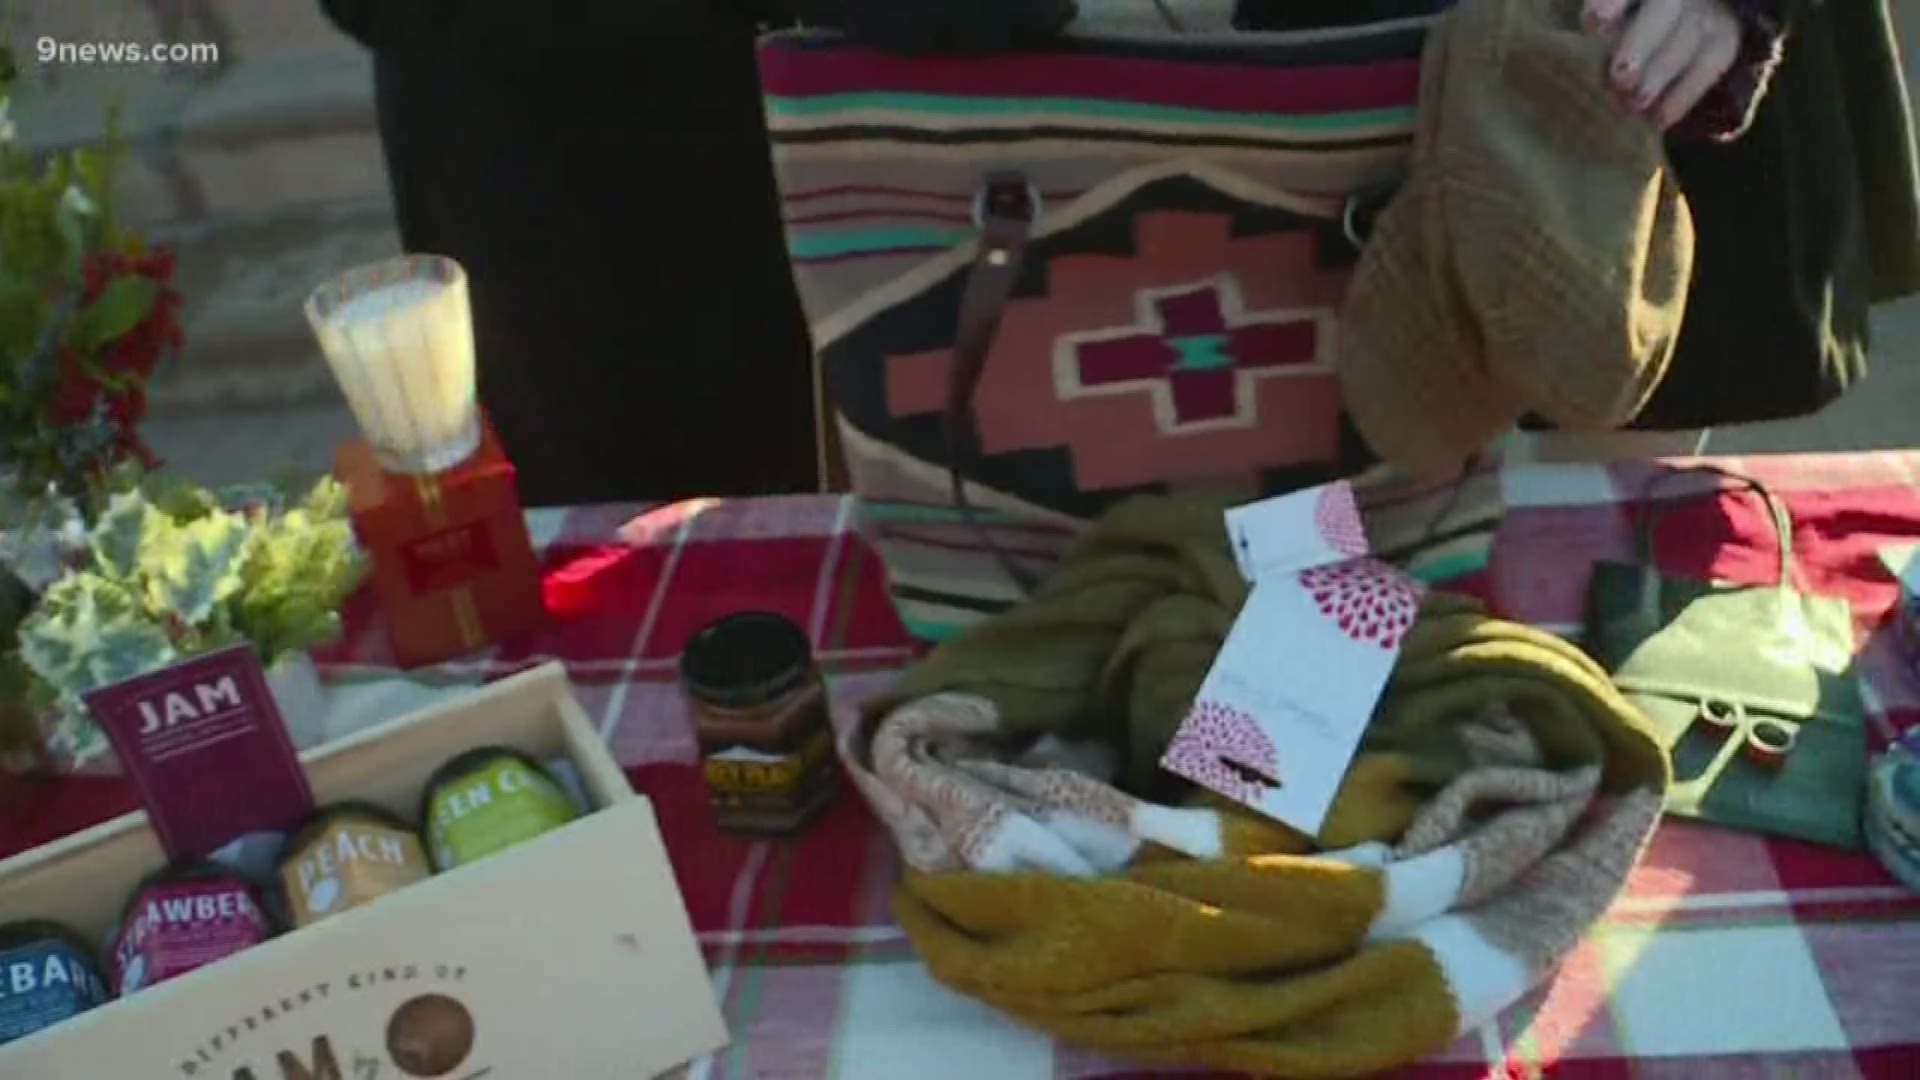 Liz Kotalik is in downtown Arvada going over some local made gift ideas.